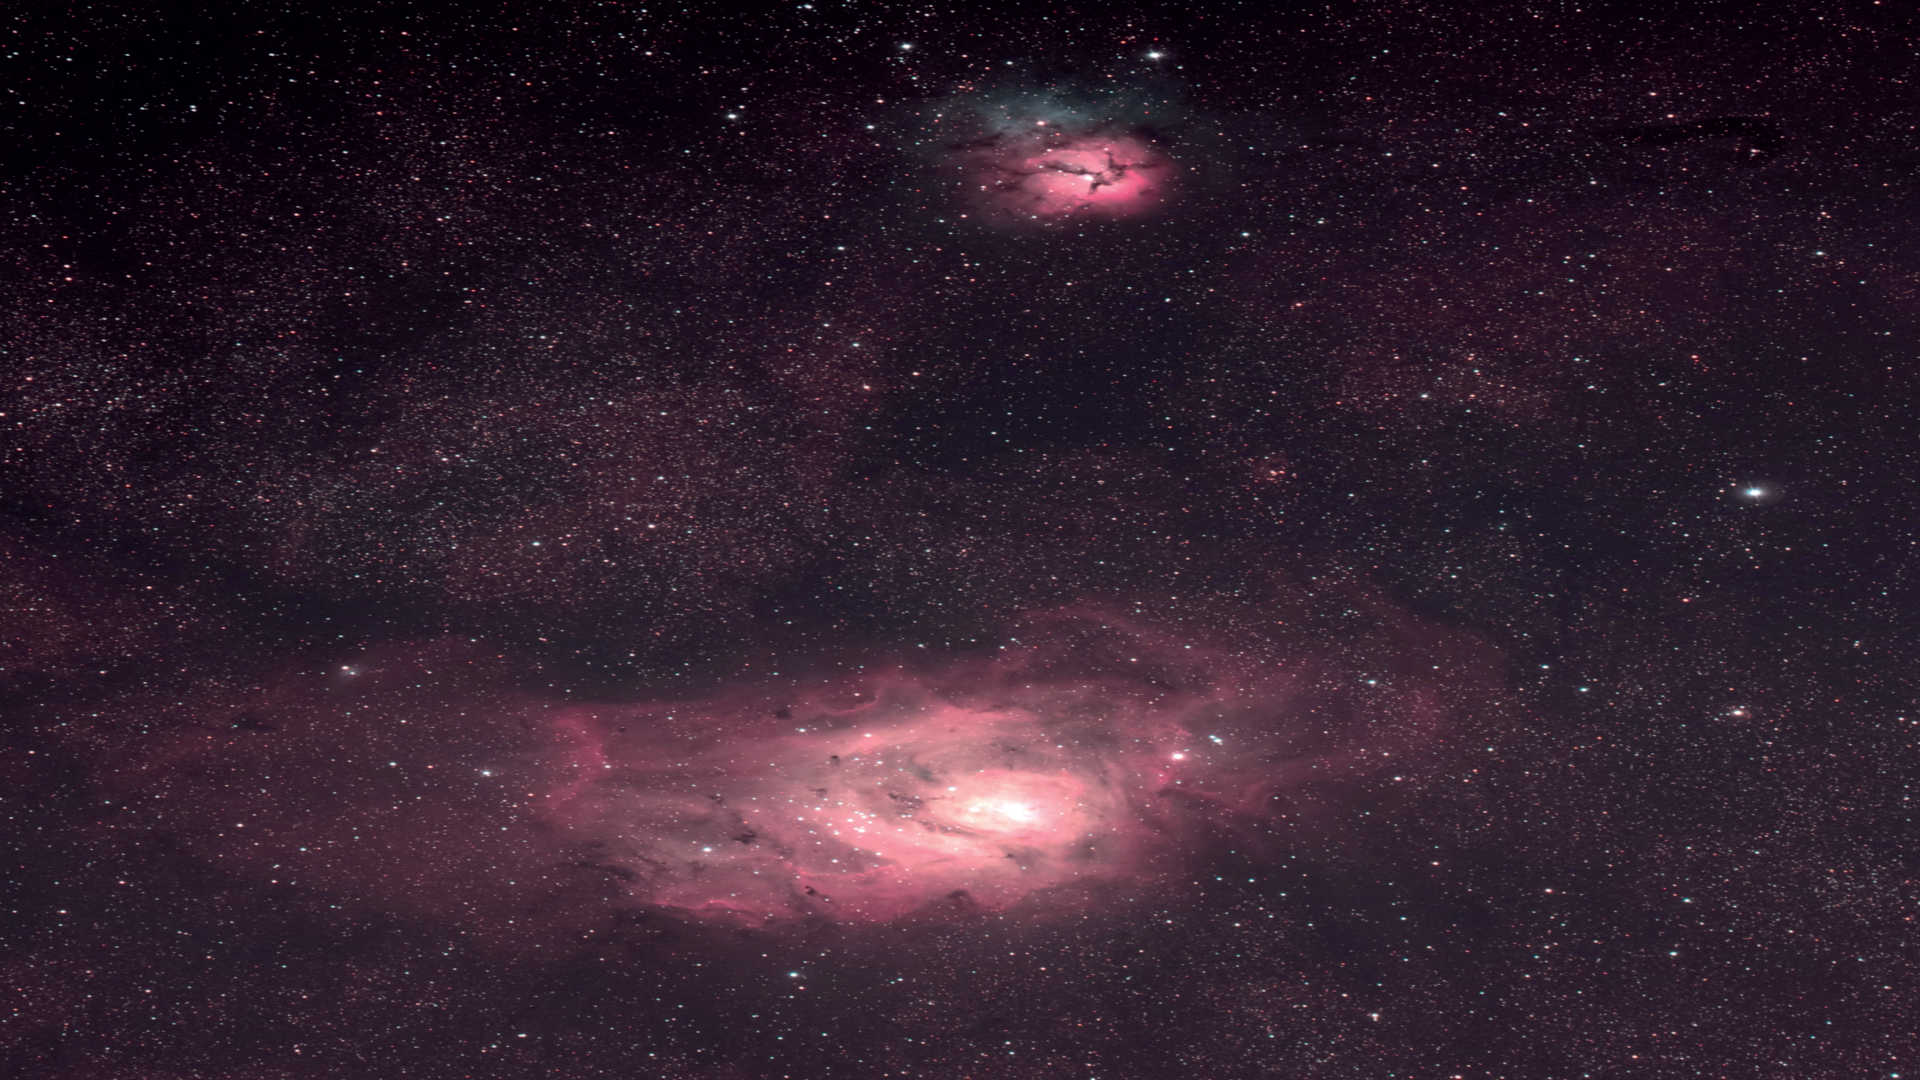 The Lagoon Nebula (Messier 8) together with the Trifid Nebula (Messier 20). The image was captured with an astrograph on an equatorial mount. The composite picture consists of eight images, each with an exposure time of 450 seconds.